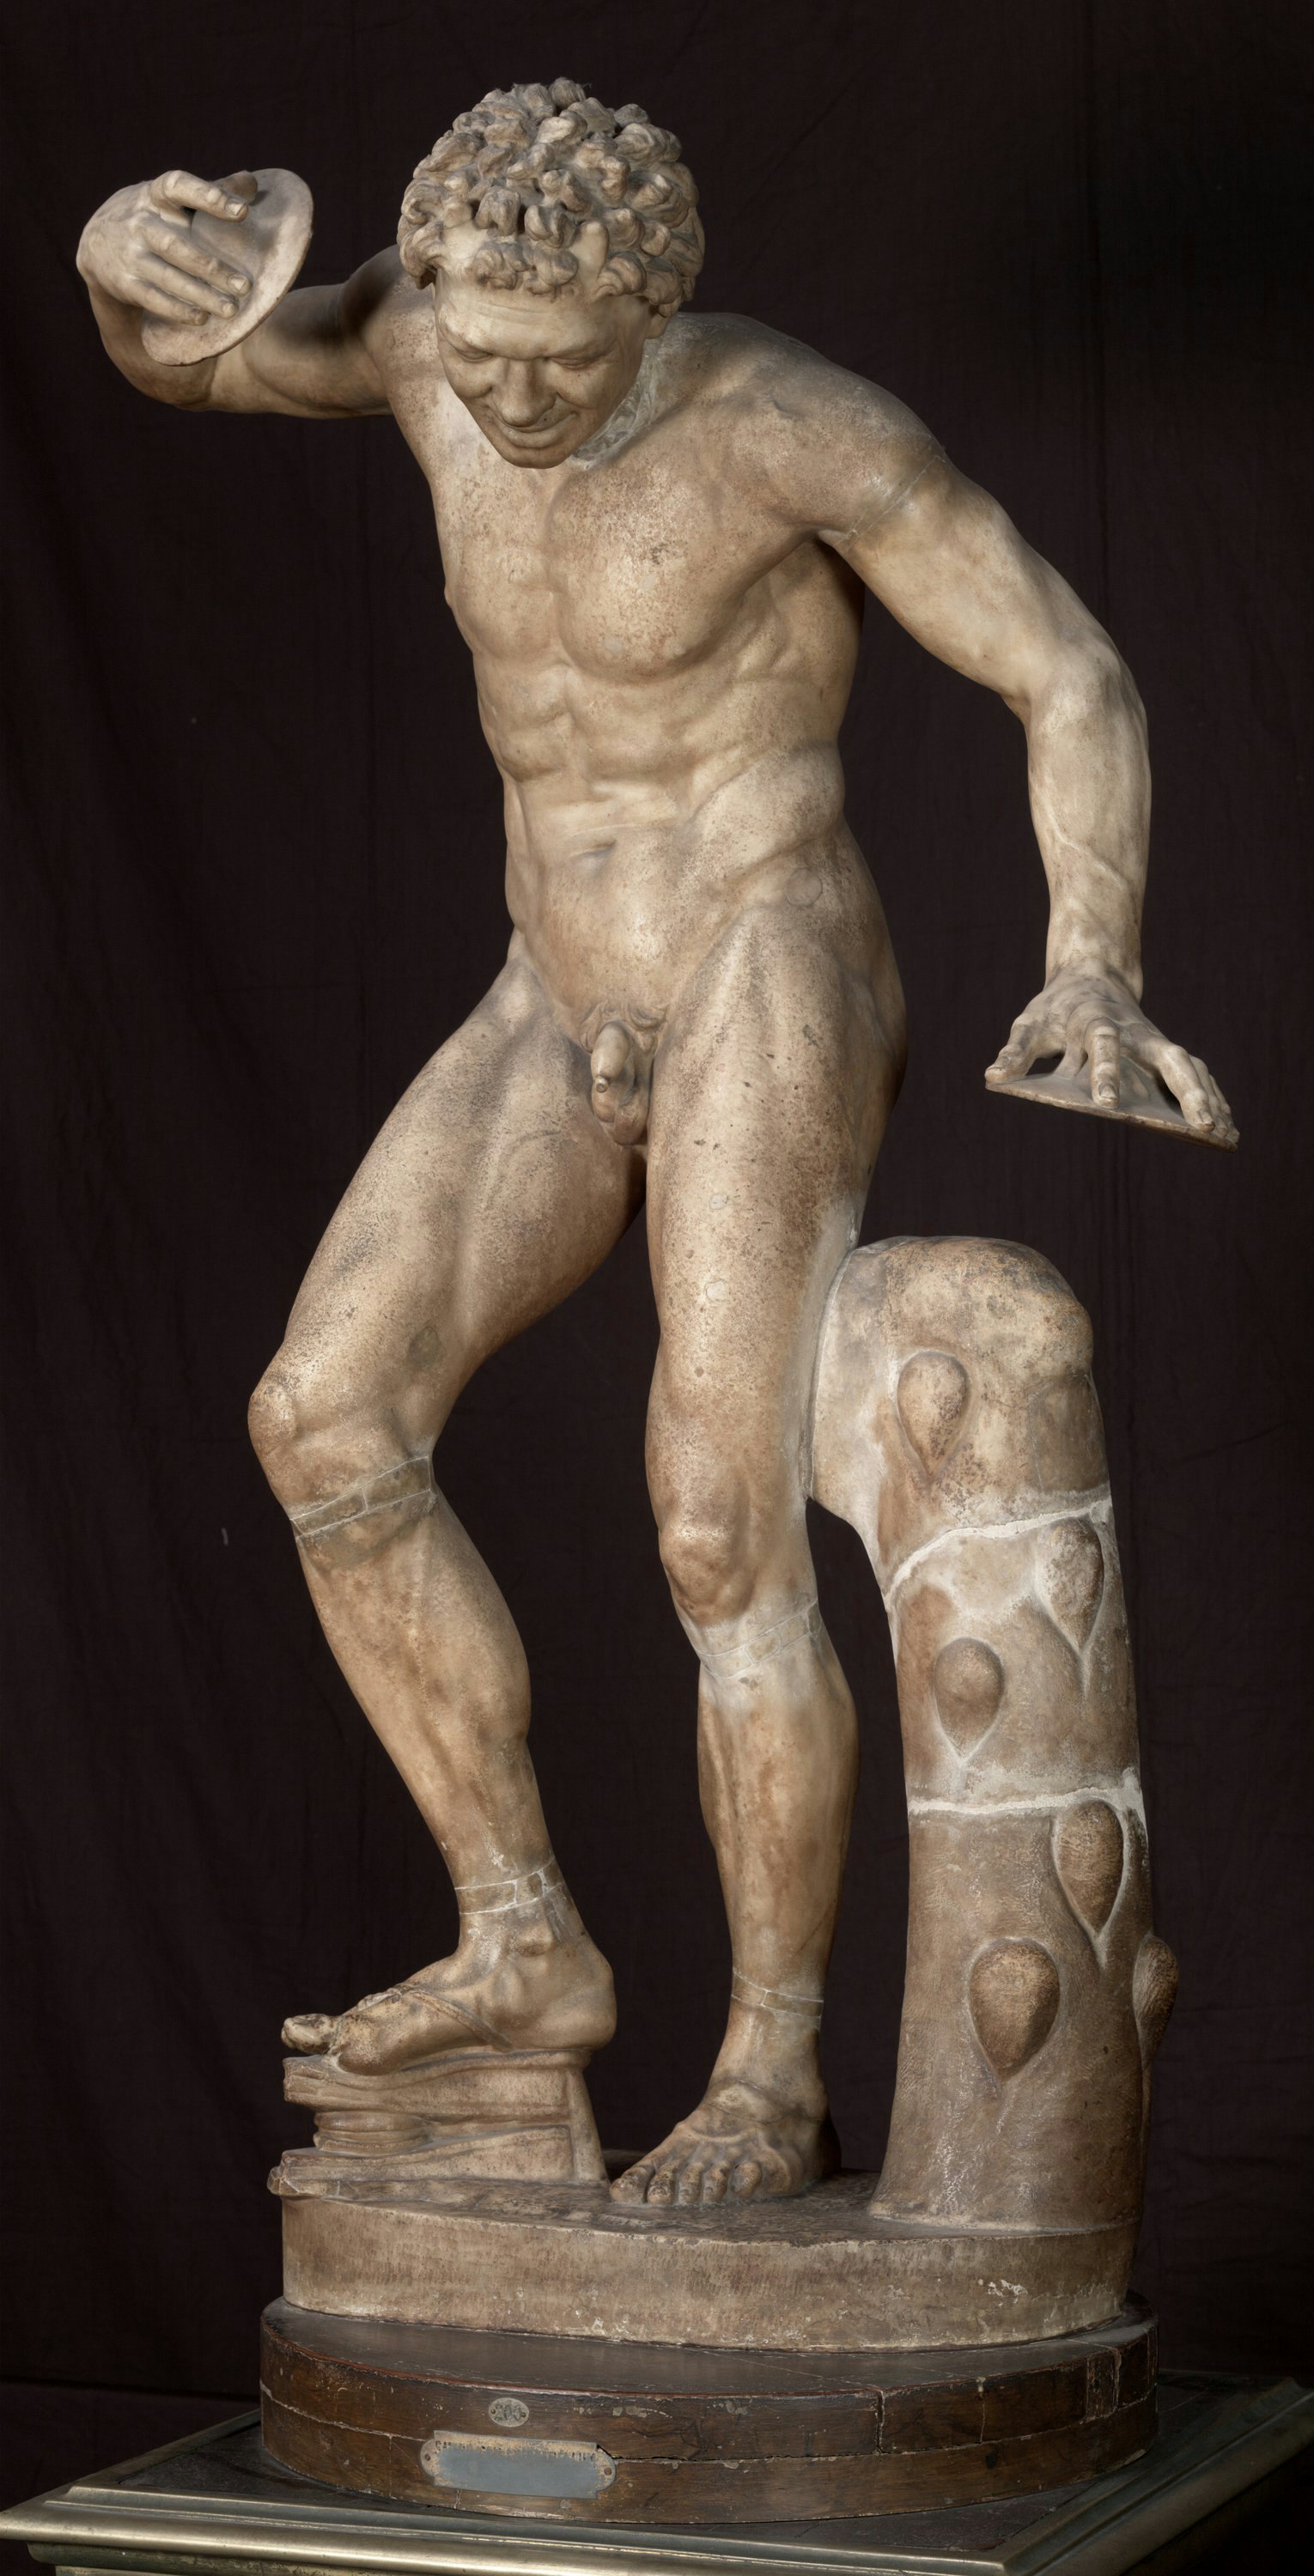 Dancing satyr (also known as kroupezeion)